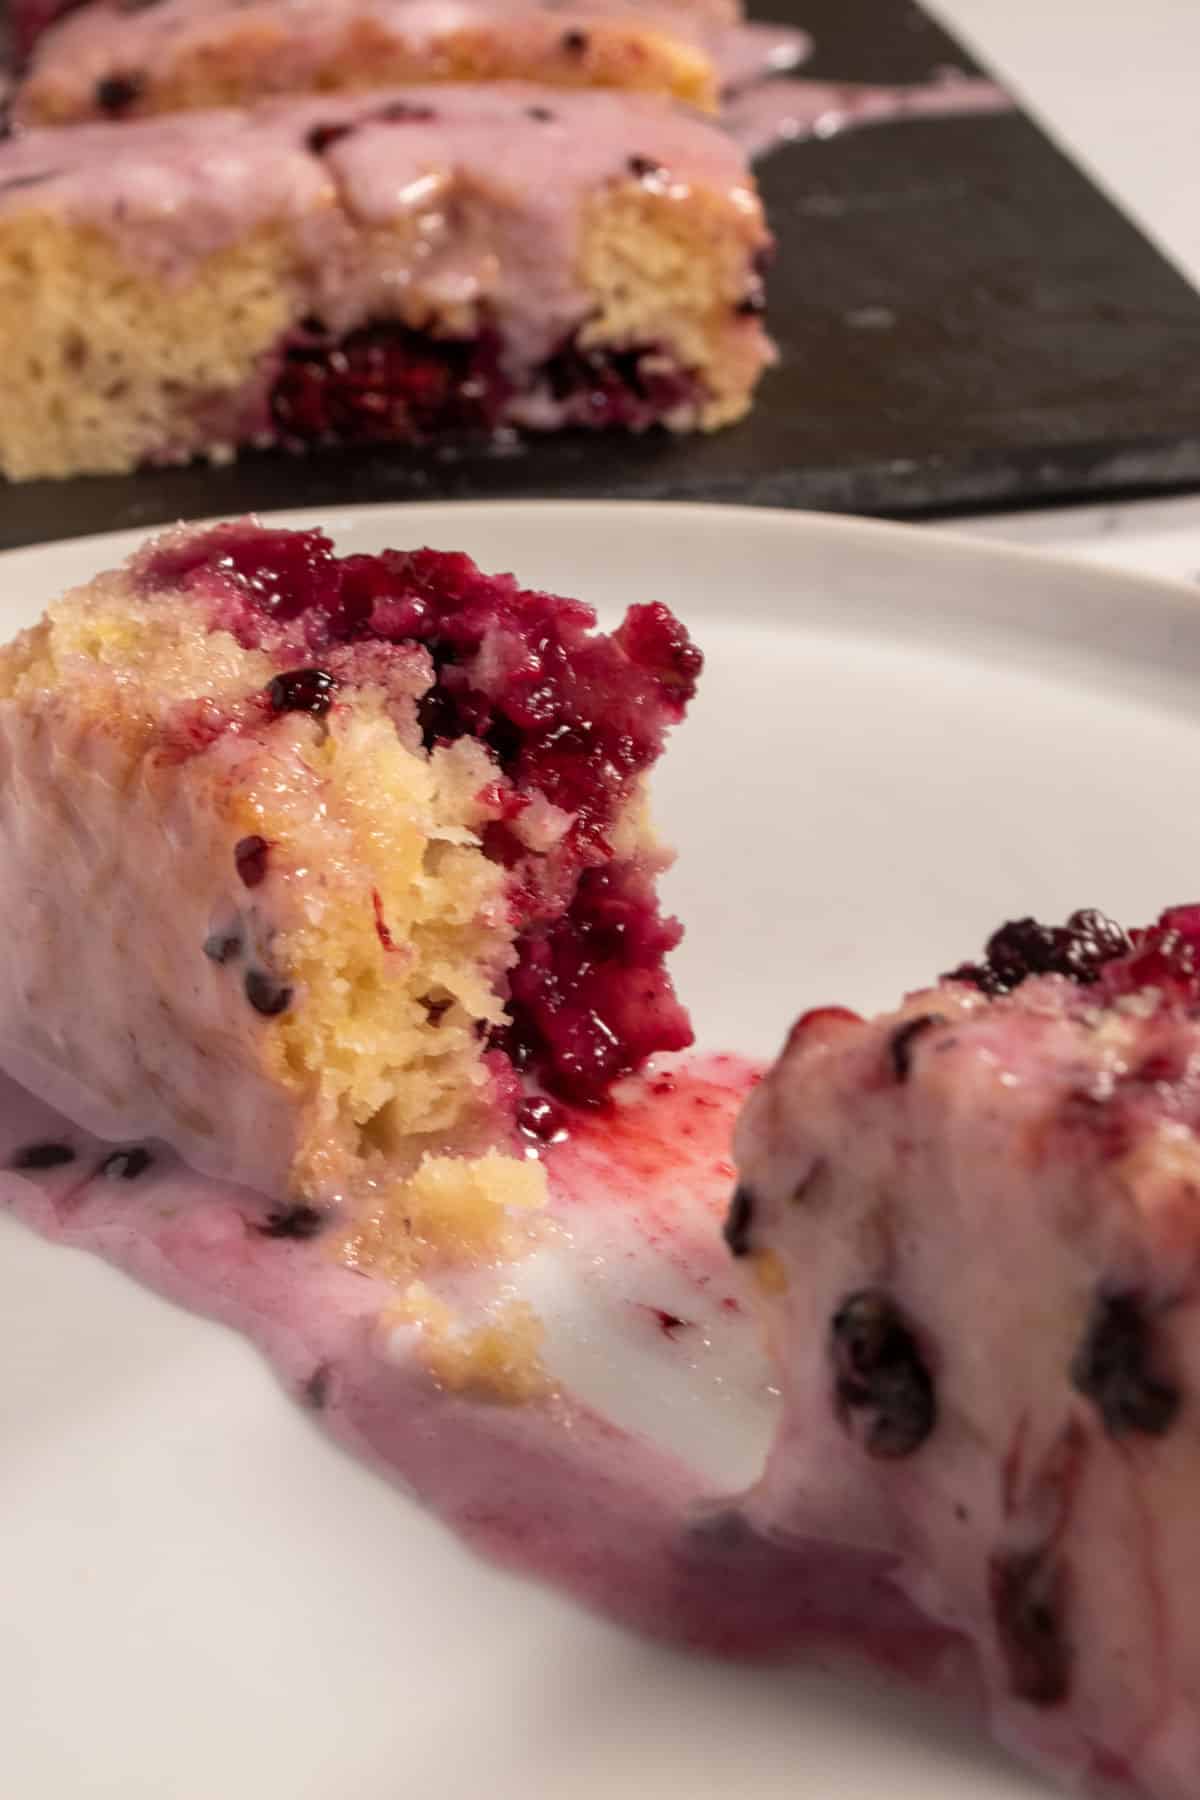 A piece of cake which has been sliced in half revealing lots of blackberries on the inside. 